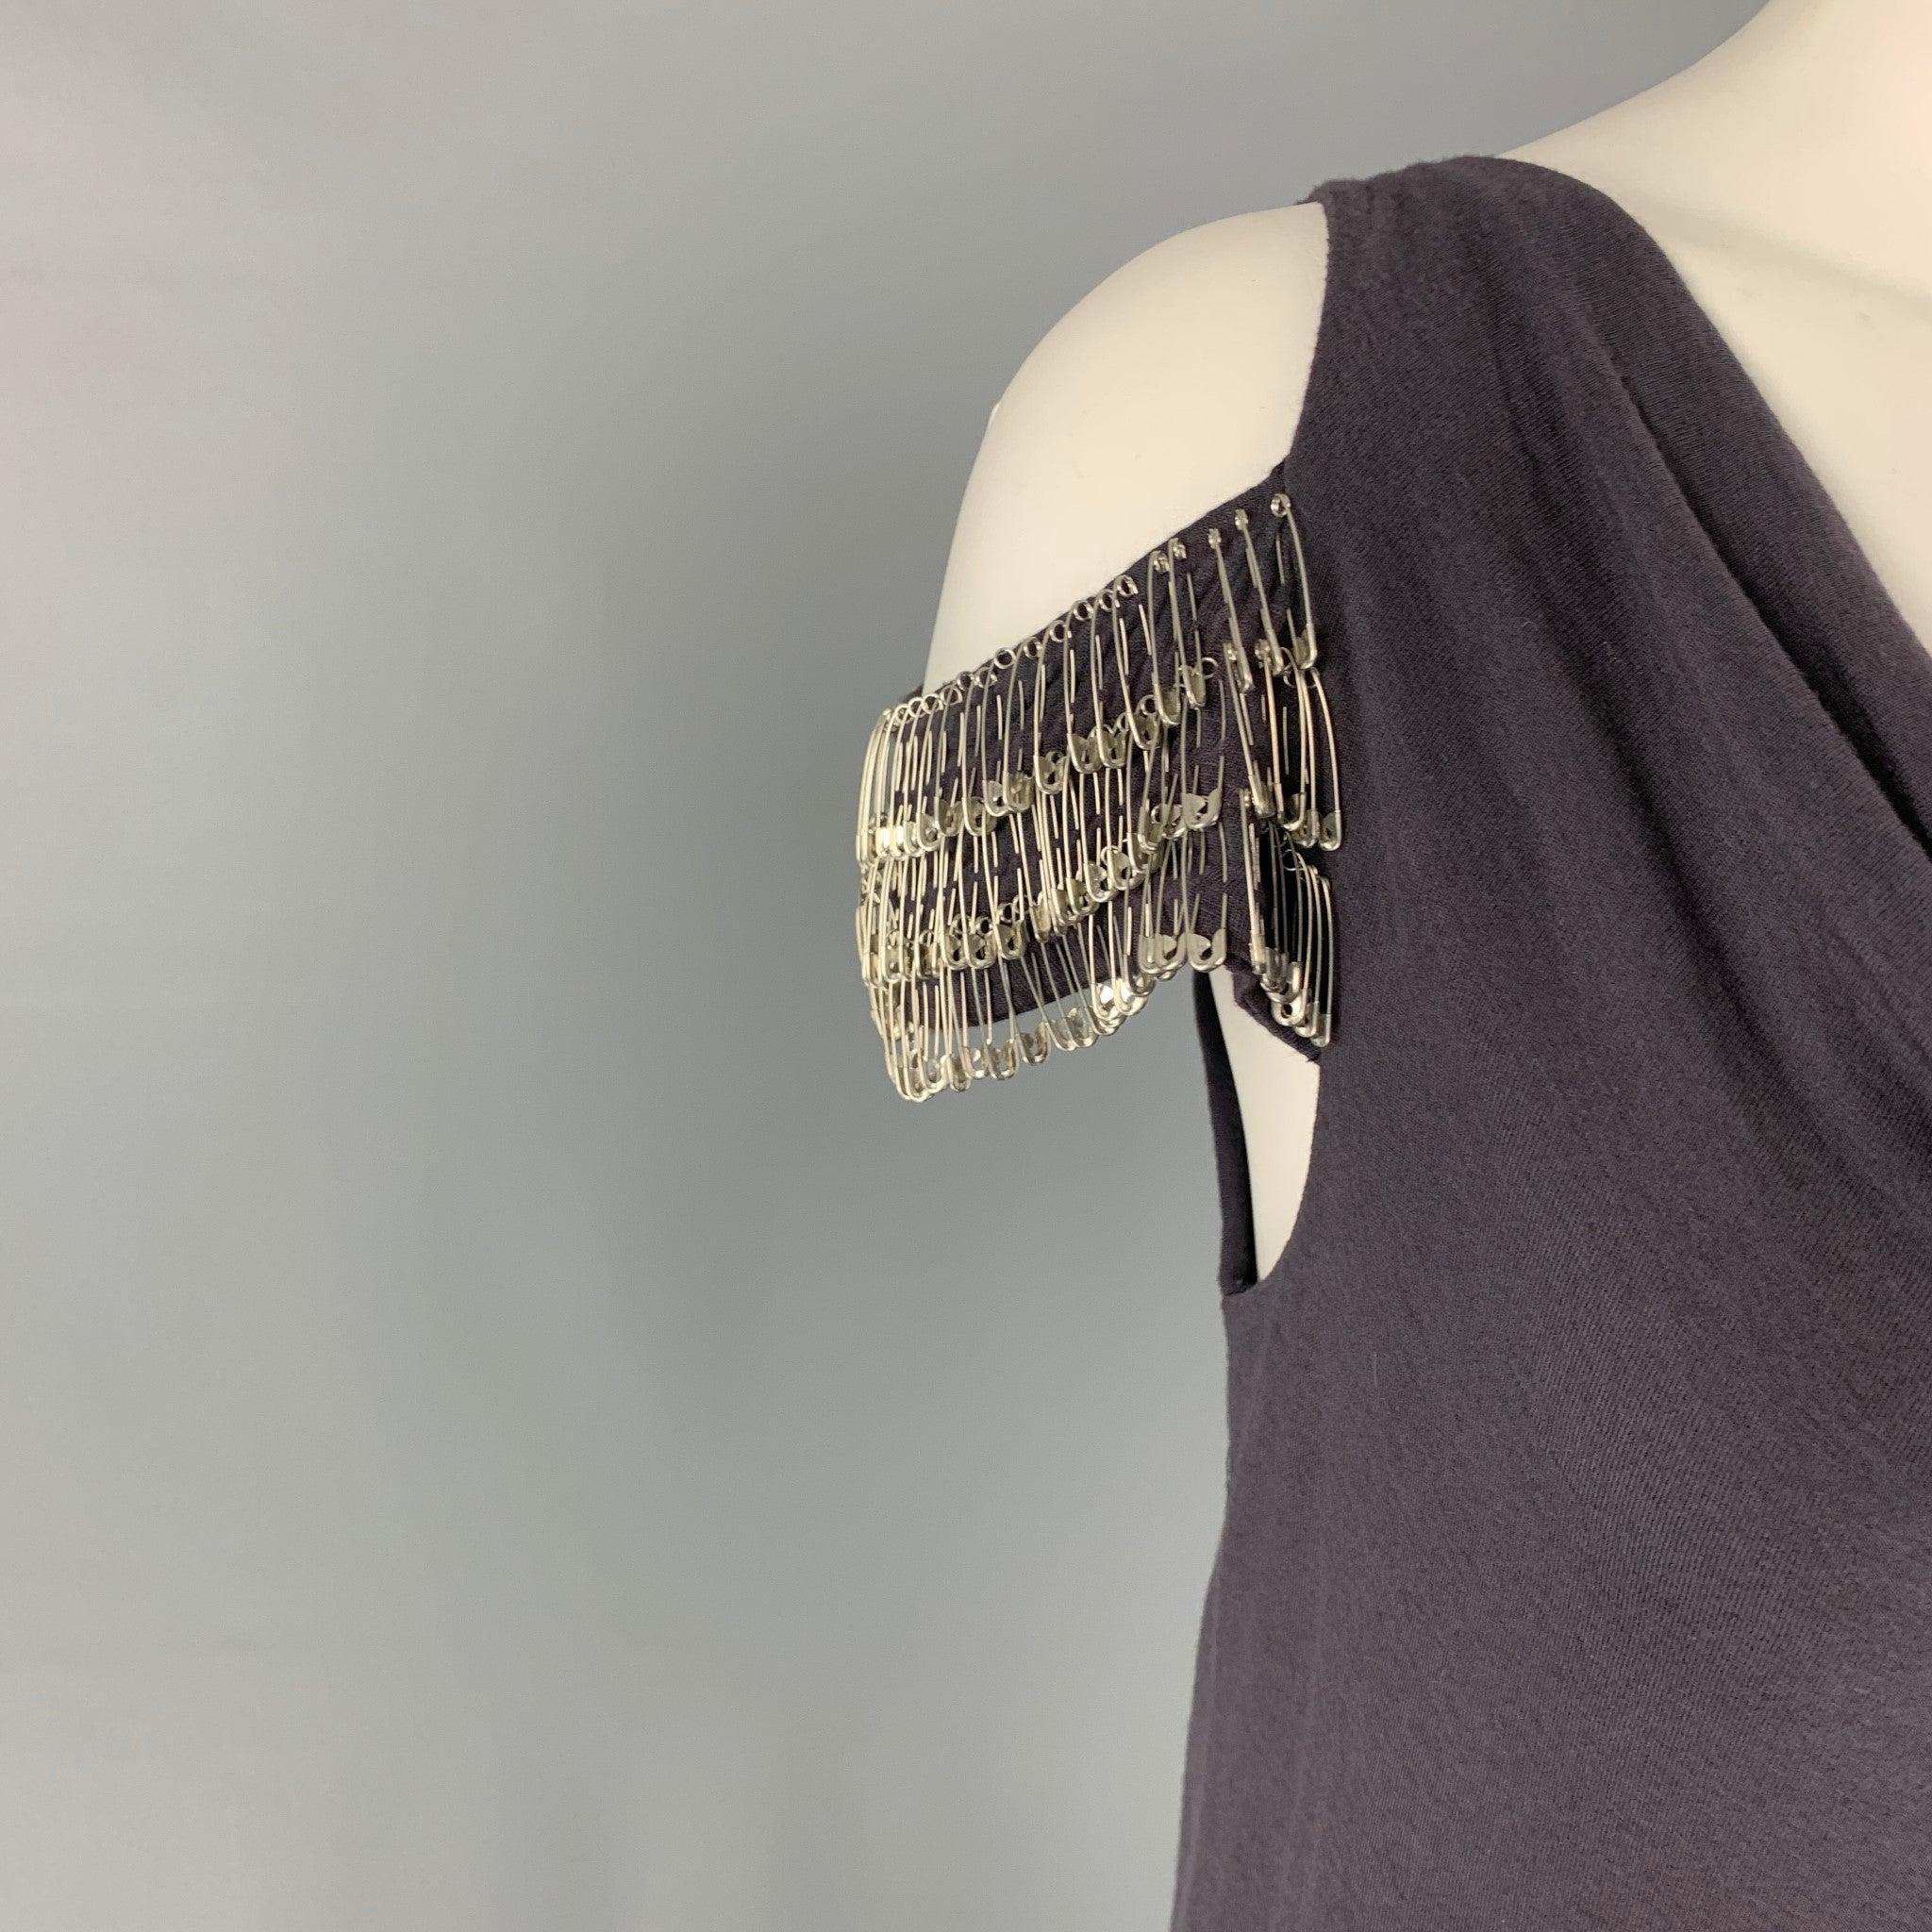 JOHN RICHMOND tank dress comes in a purple rayon wool featuring a sleeveless design, scoop neckline, and silver tone safety pin details. Excellent
Pre-Owned Condition. 

Marked:   42 

Measurements: 
  Bust: 35 inches Hip: 33 inches Length: 31